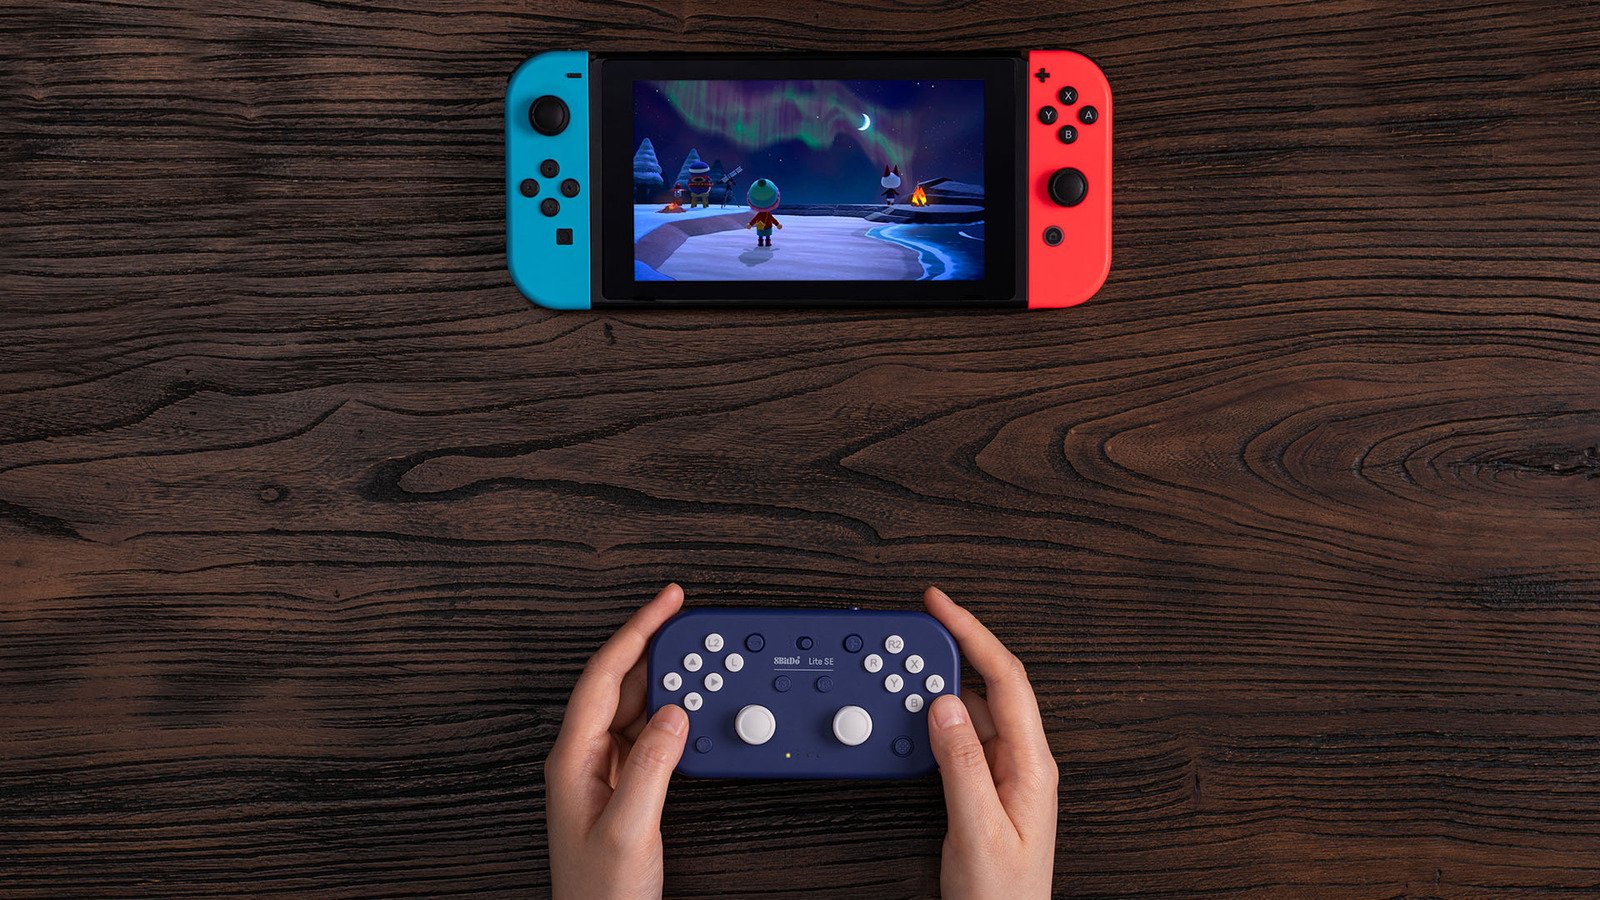 8BitDo Lite SE Puts Accessibility At Play With A New Design